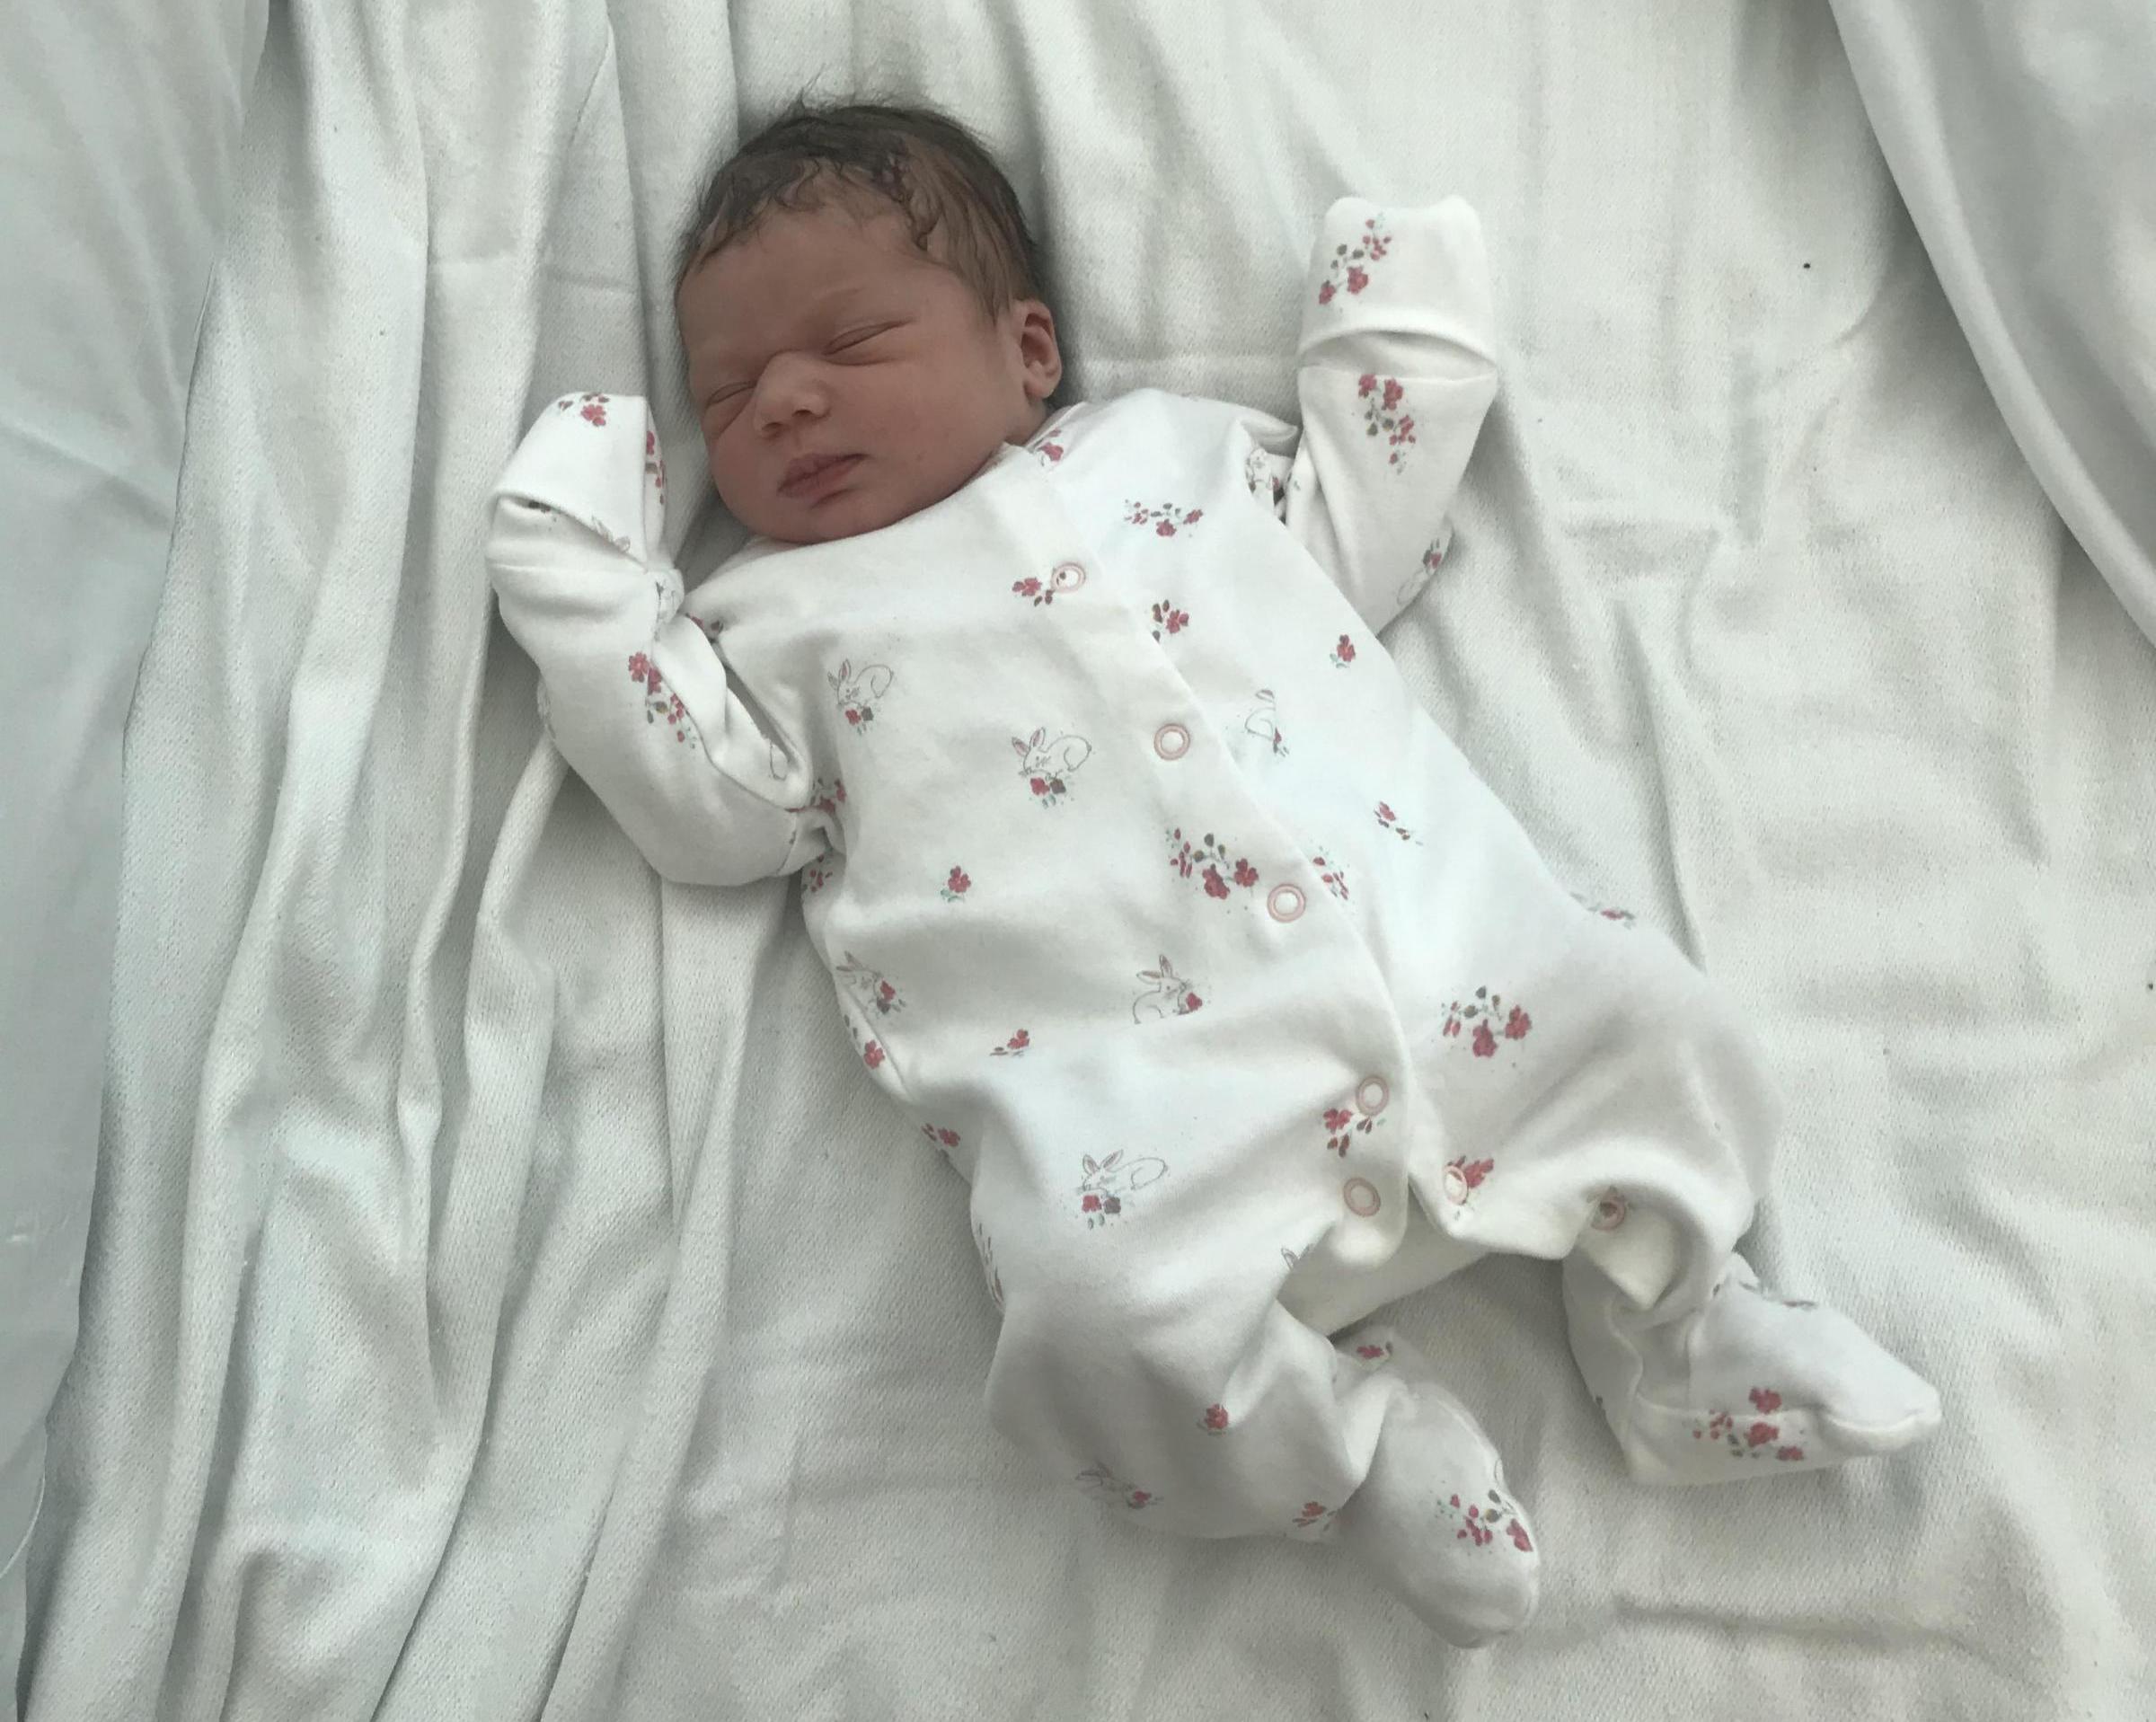 Welcome to Imogen Elsie Carnegie who was born 11 days late at the Royal Gwent Hospital, Newport, on September 25, 2020, weighing 8lb 1oz. Her parents are Emily Lippitt and Jordan Carnegie, of Cwmbran, and her big brother is Louis (four).